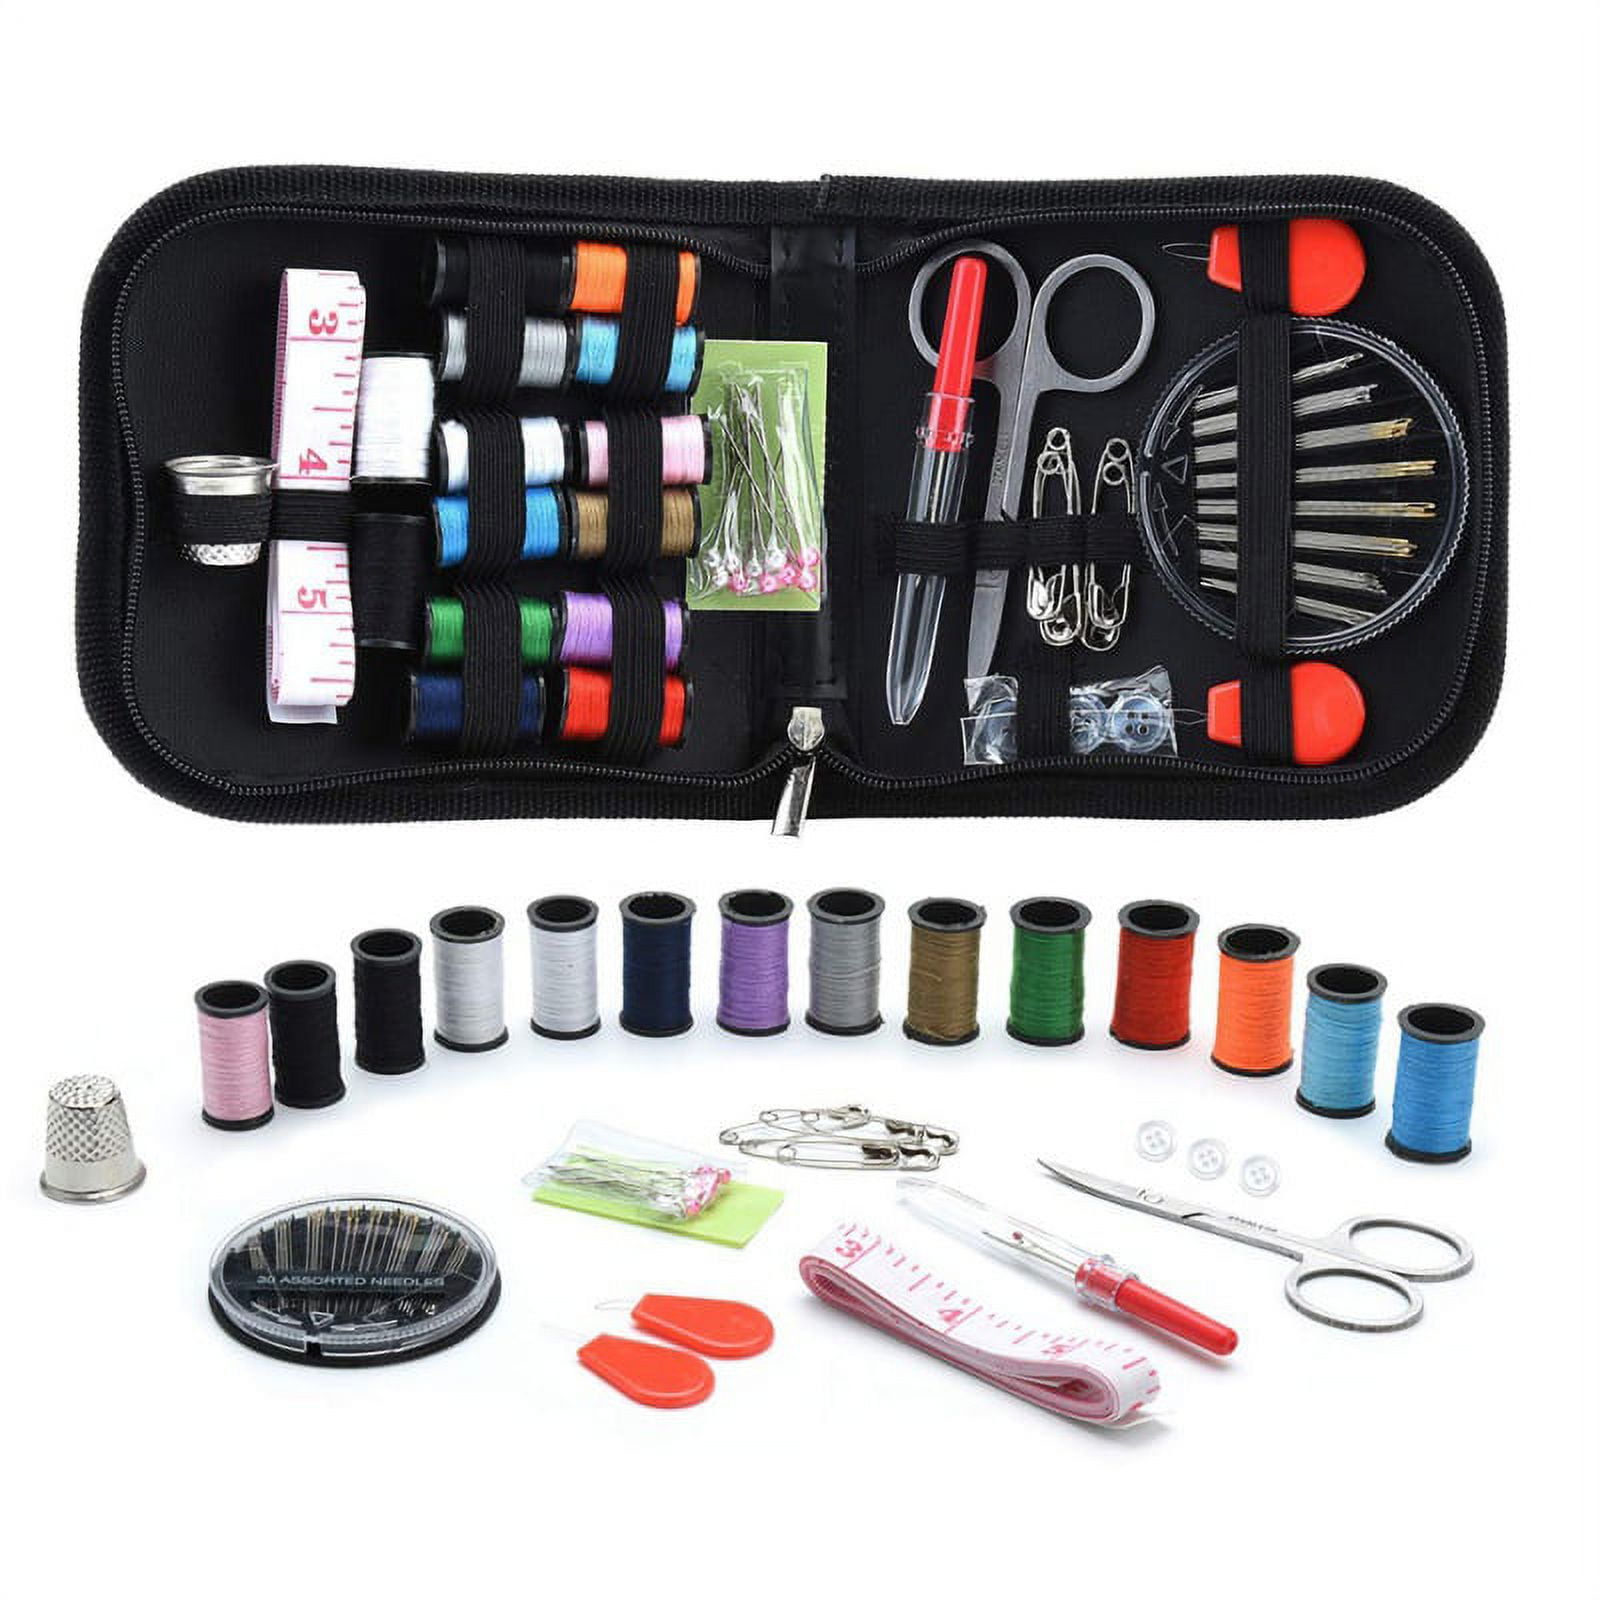 Travel Sewing Kit,mini Sewing Kit For Home, Travel Emergency